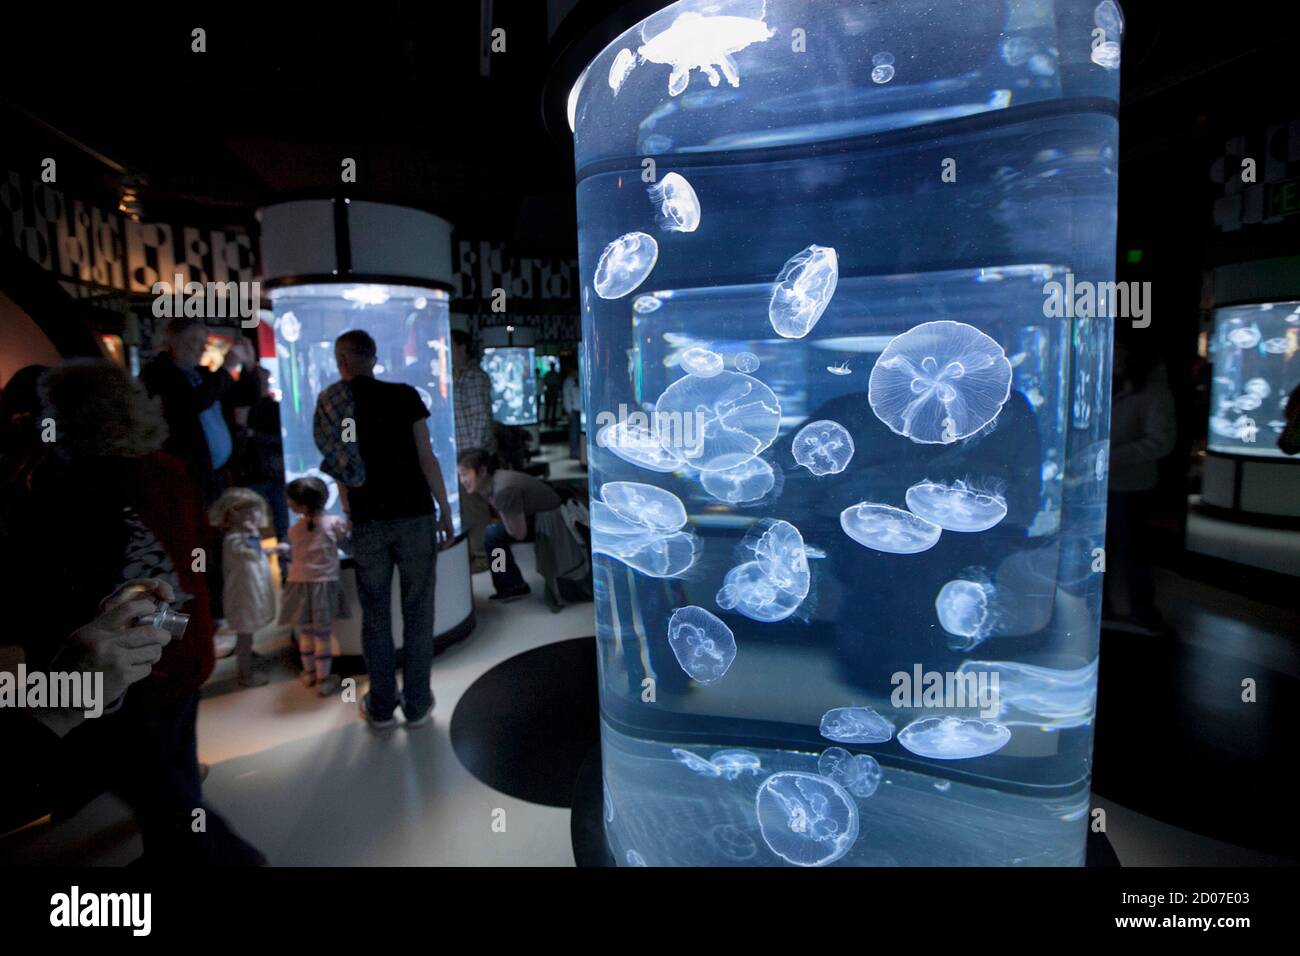 Visitors look at Moon Jellies during 'The Jellies Experience' exhibition at the Monterey Bay Aquarium in Monterey, California, March 30, 2012. The new $3.5 million exhibition features 16 jellyfish species from around the world in a collection of live and interactive displays, according to Monterey Bay Aquarium officials. REUTERS/Richard Green (UNITED STATES - Tags: ANIMALS ENVIRONMENT SCIENCE TECHNOLOGY) Stock Photo